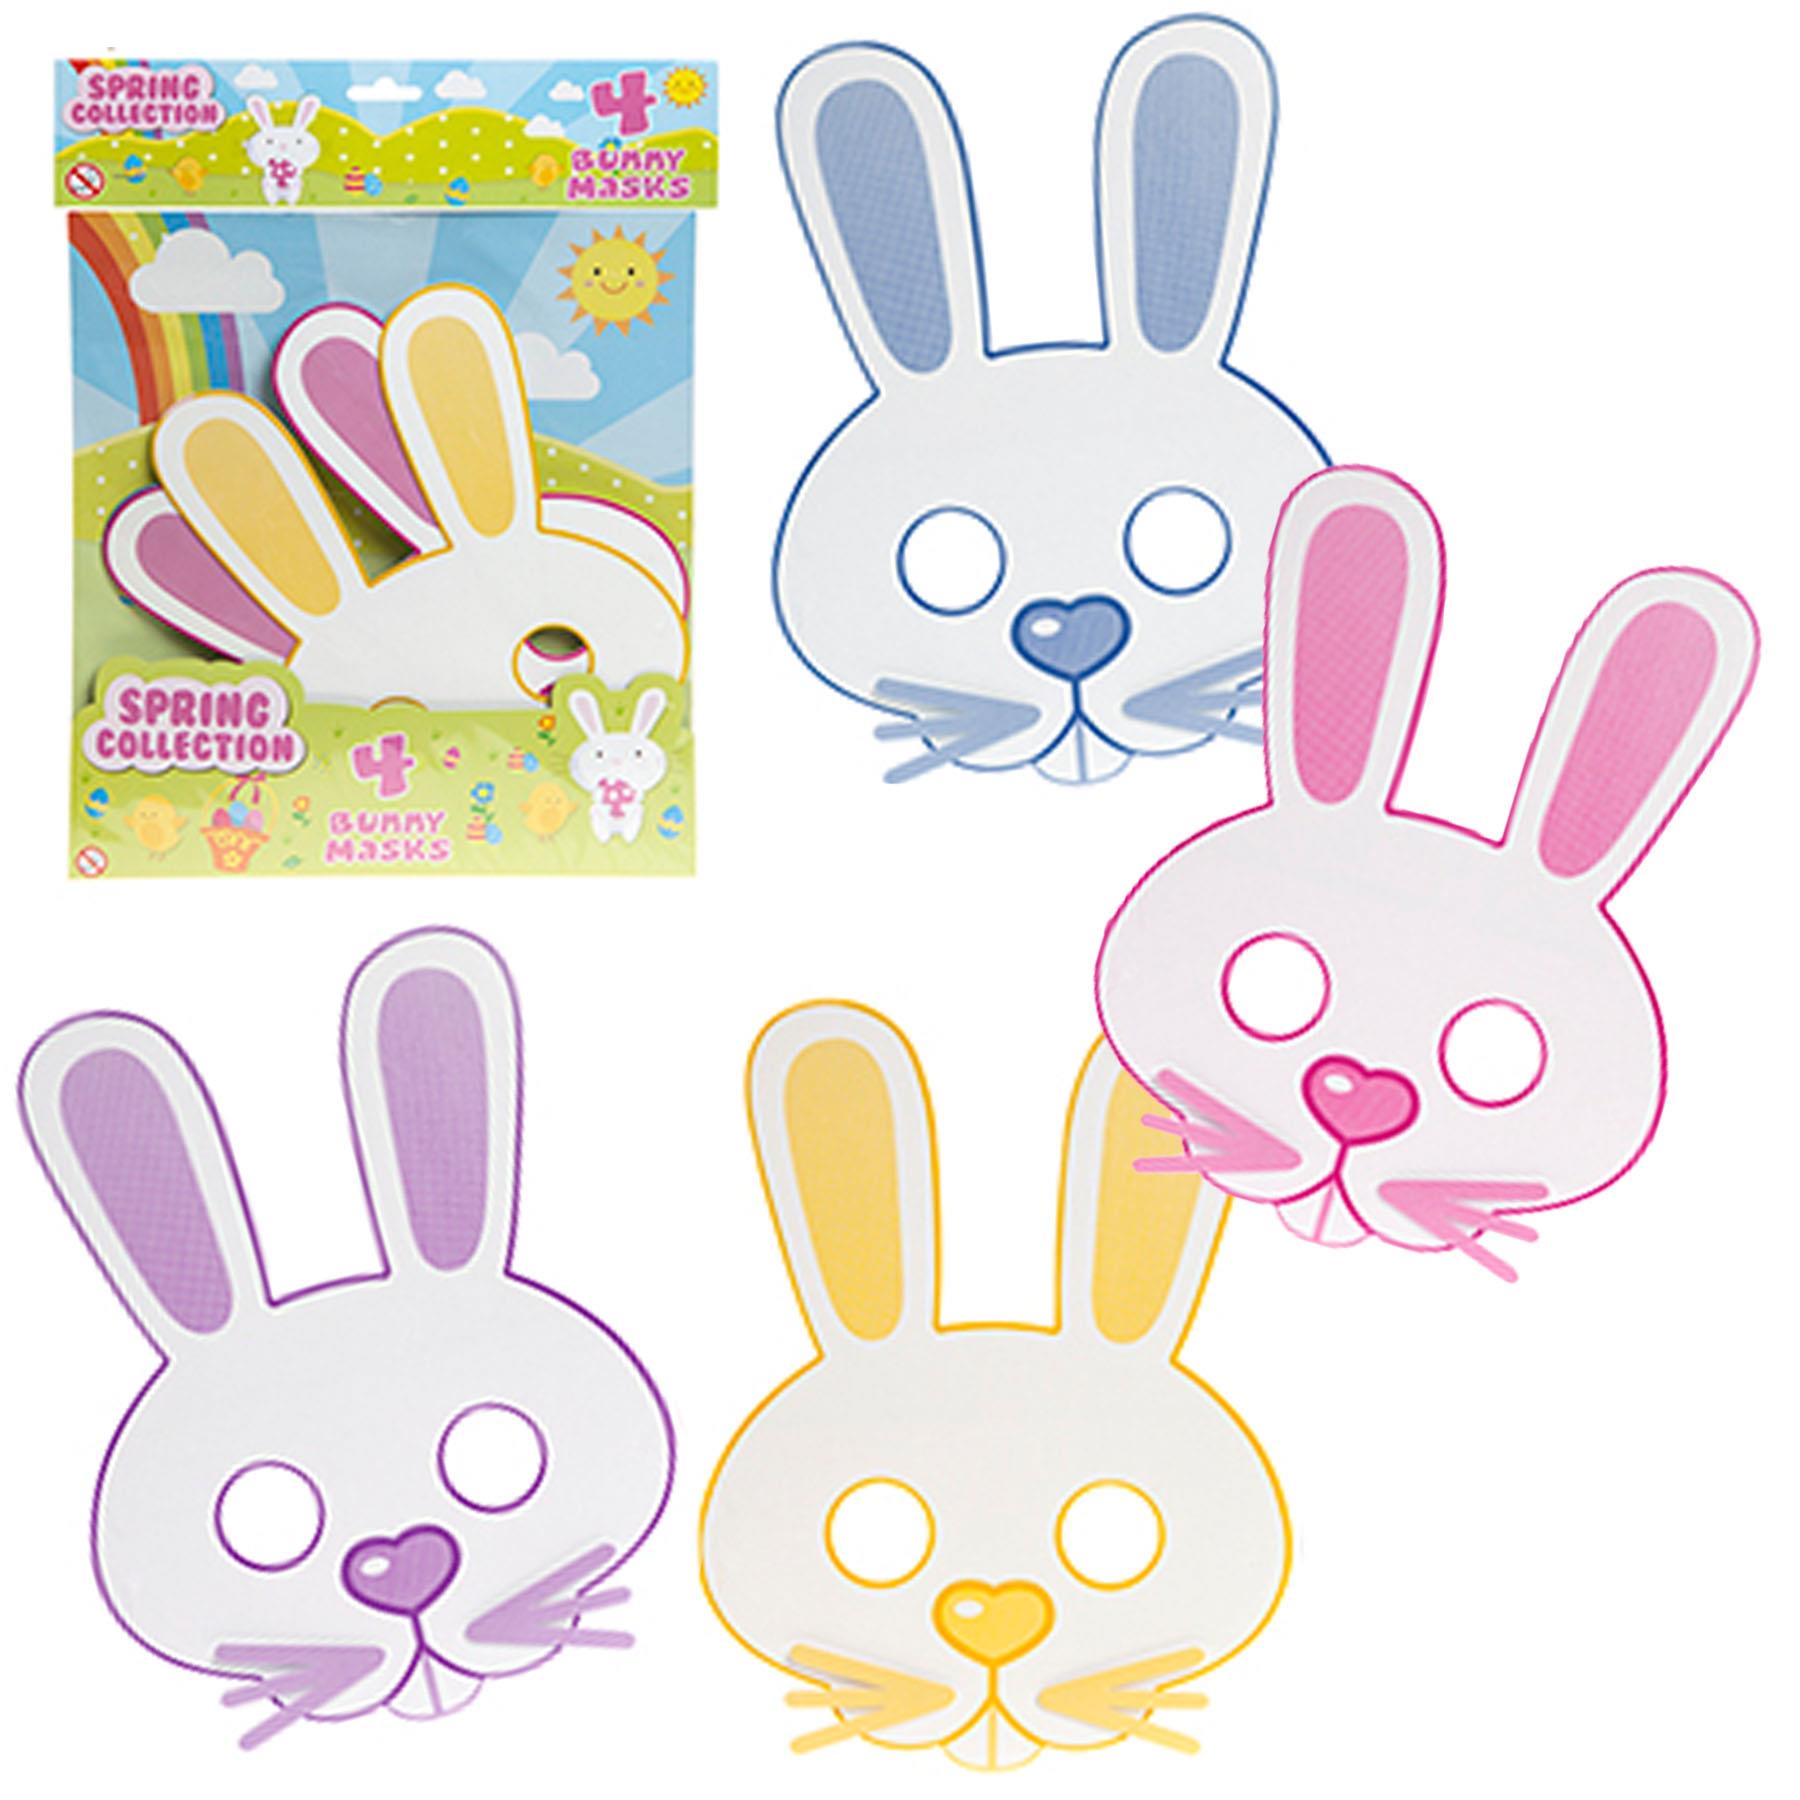 Easter Arts and Crafts Children Activities - 4 Pack Bunny Masks 736115